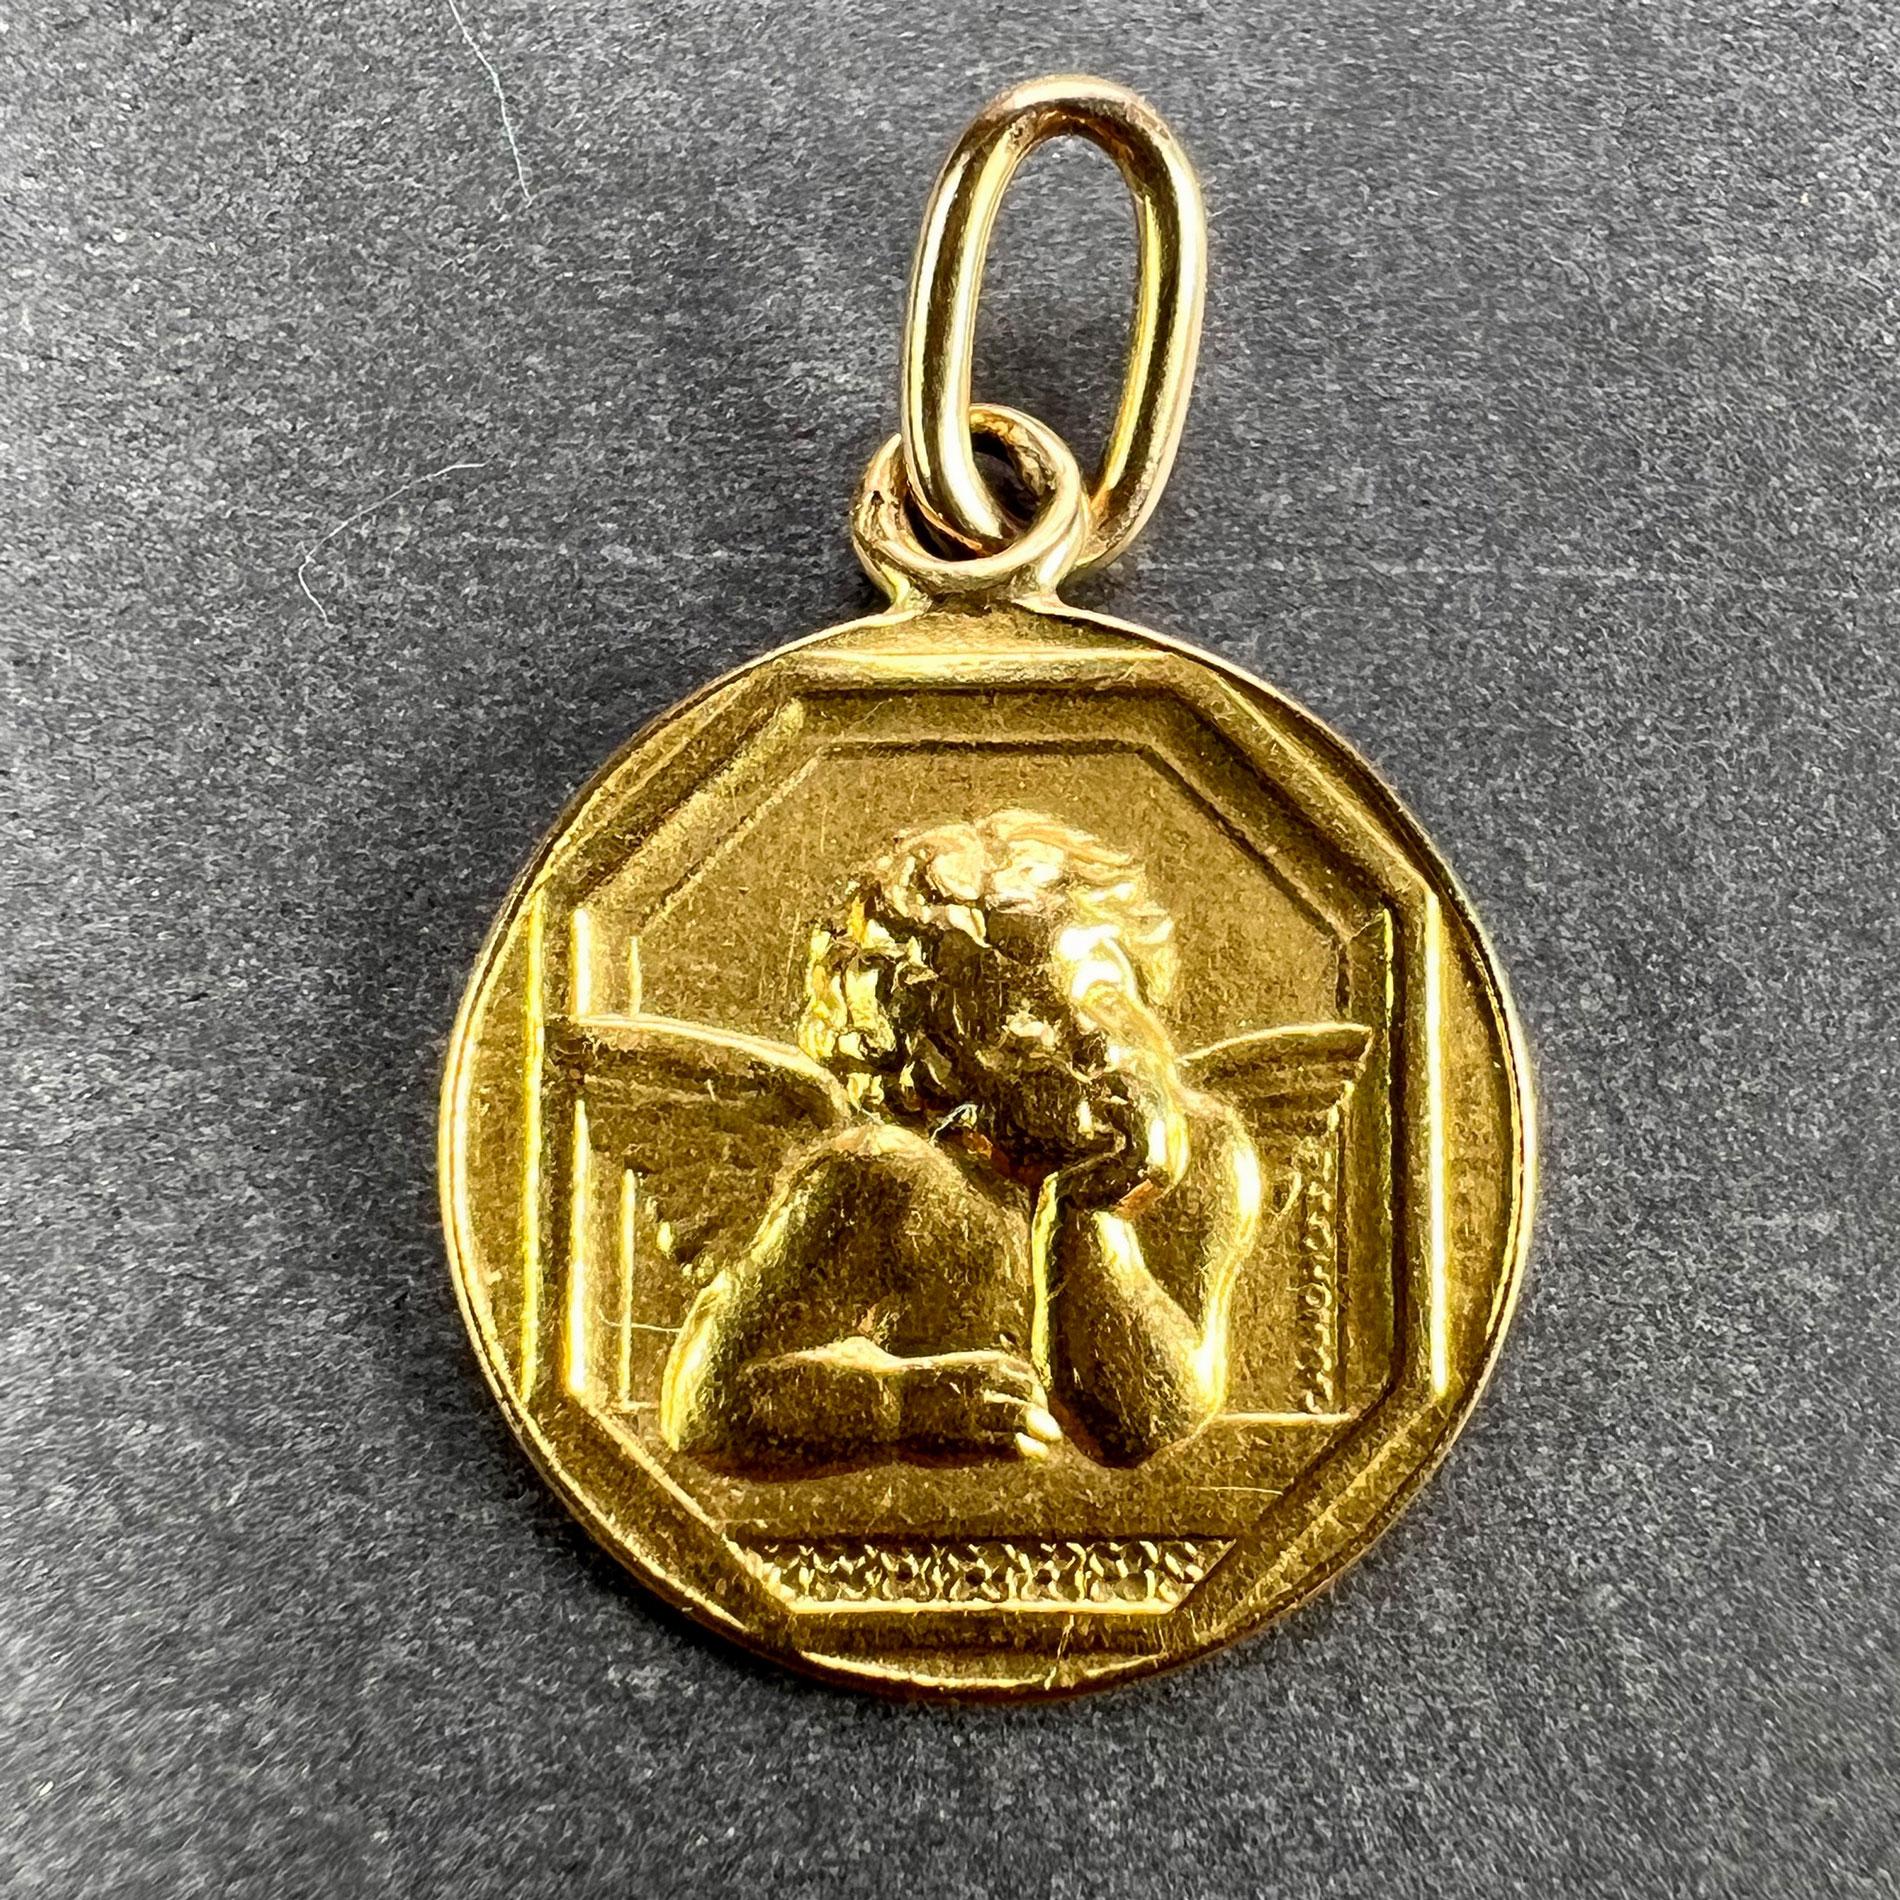 An 18 karat (18K) yellow gold pendant designed as a round medal depicting the Raphael’s cherub. The reverse depicts roses and is engraved with the date ‘9 Mars 1942’. Stamped with the eagle’s head for French manufacture and 18 karat